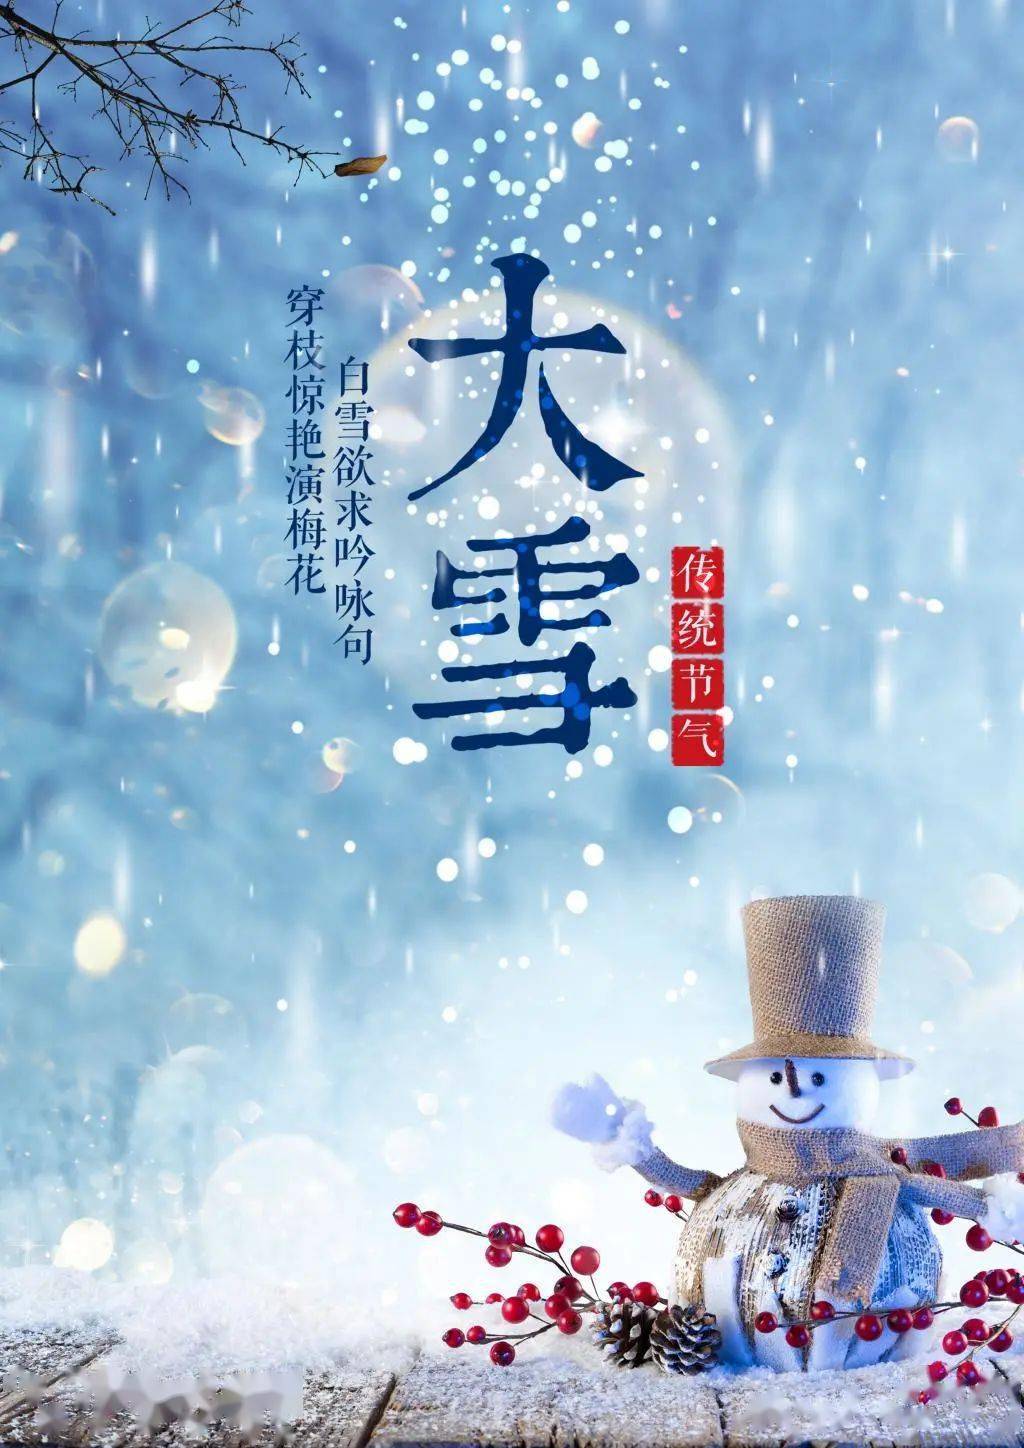 Tianya Mingyue Sword Snow Fox Pictures_Where is the Tianya Mingyue Sword Snow Fox_Tianya Mingyue Sword Fox Pictures